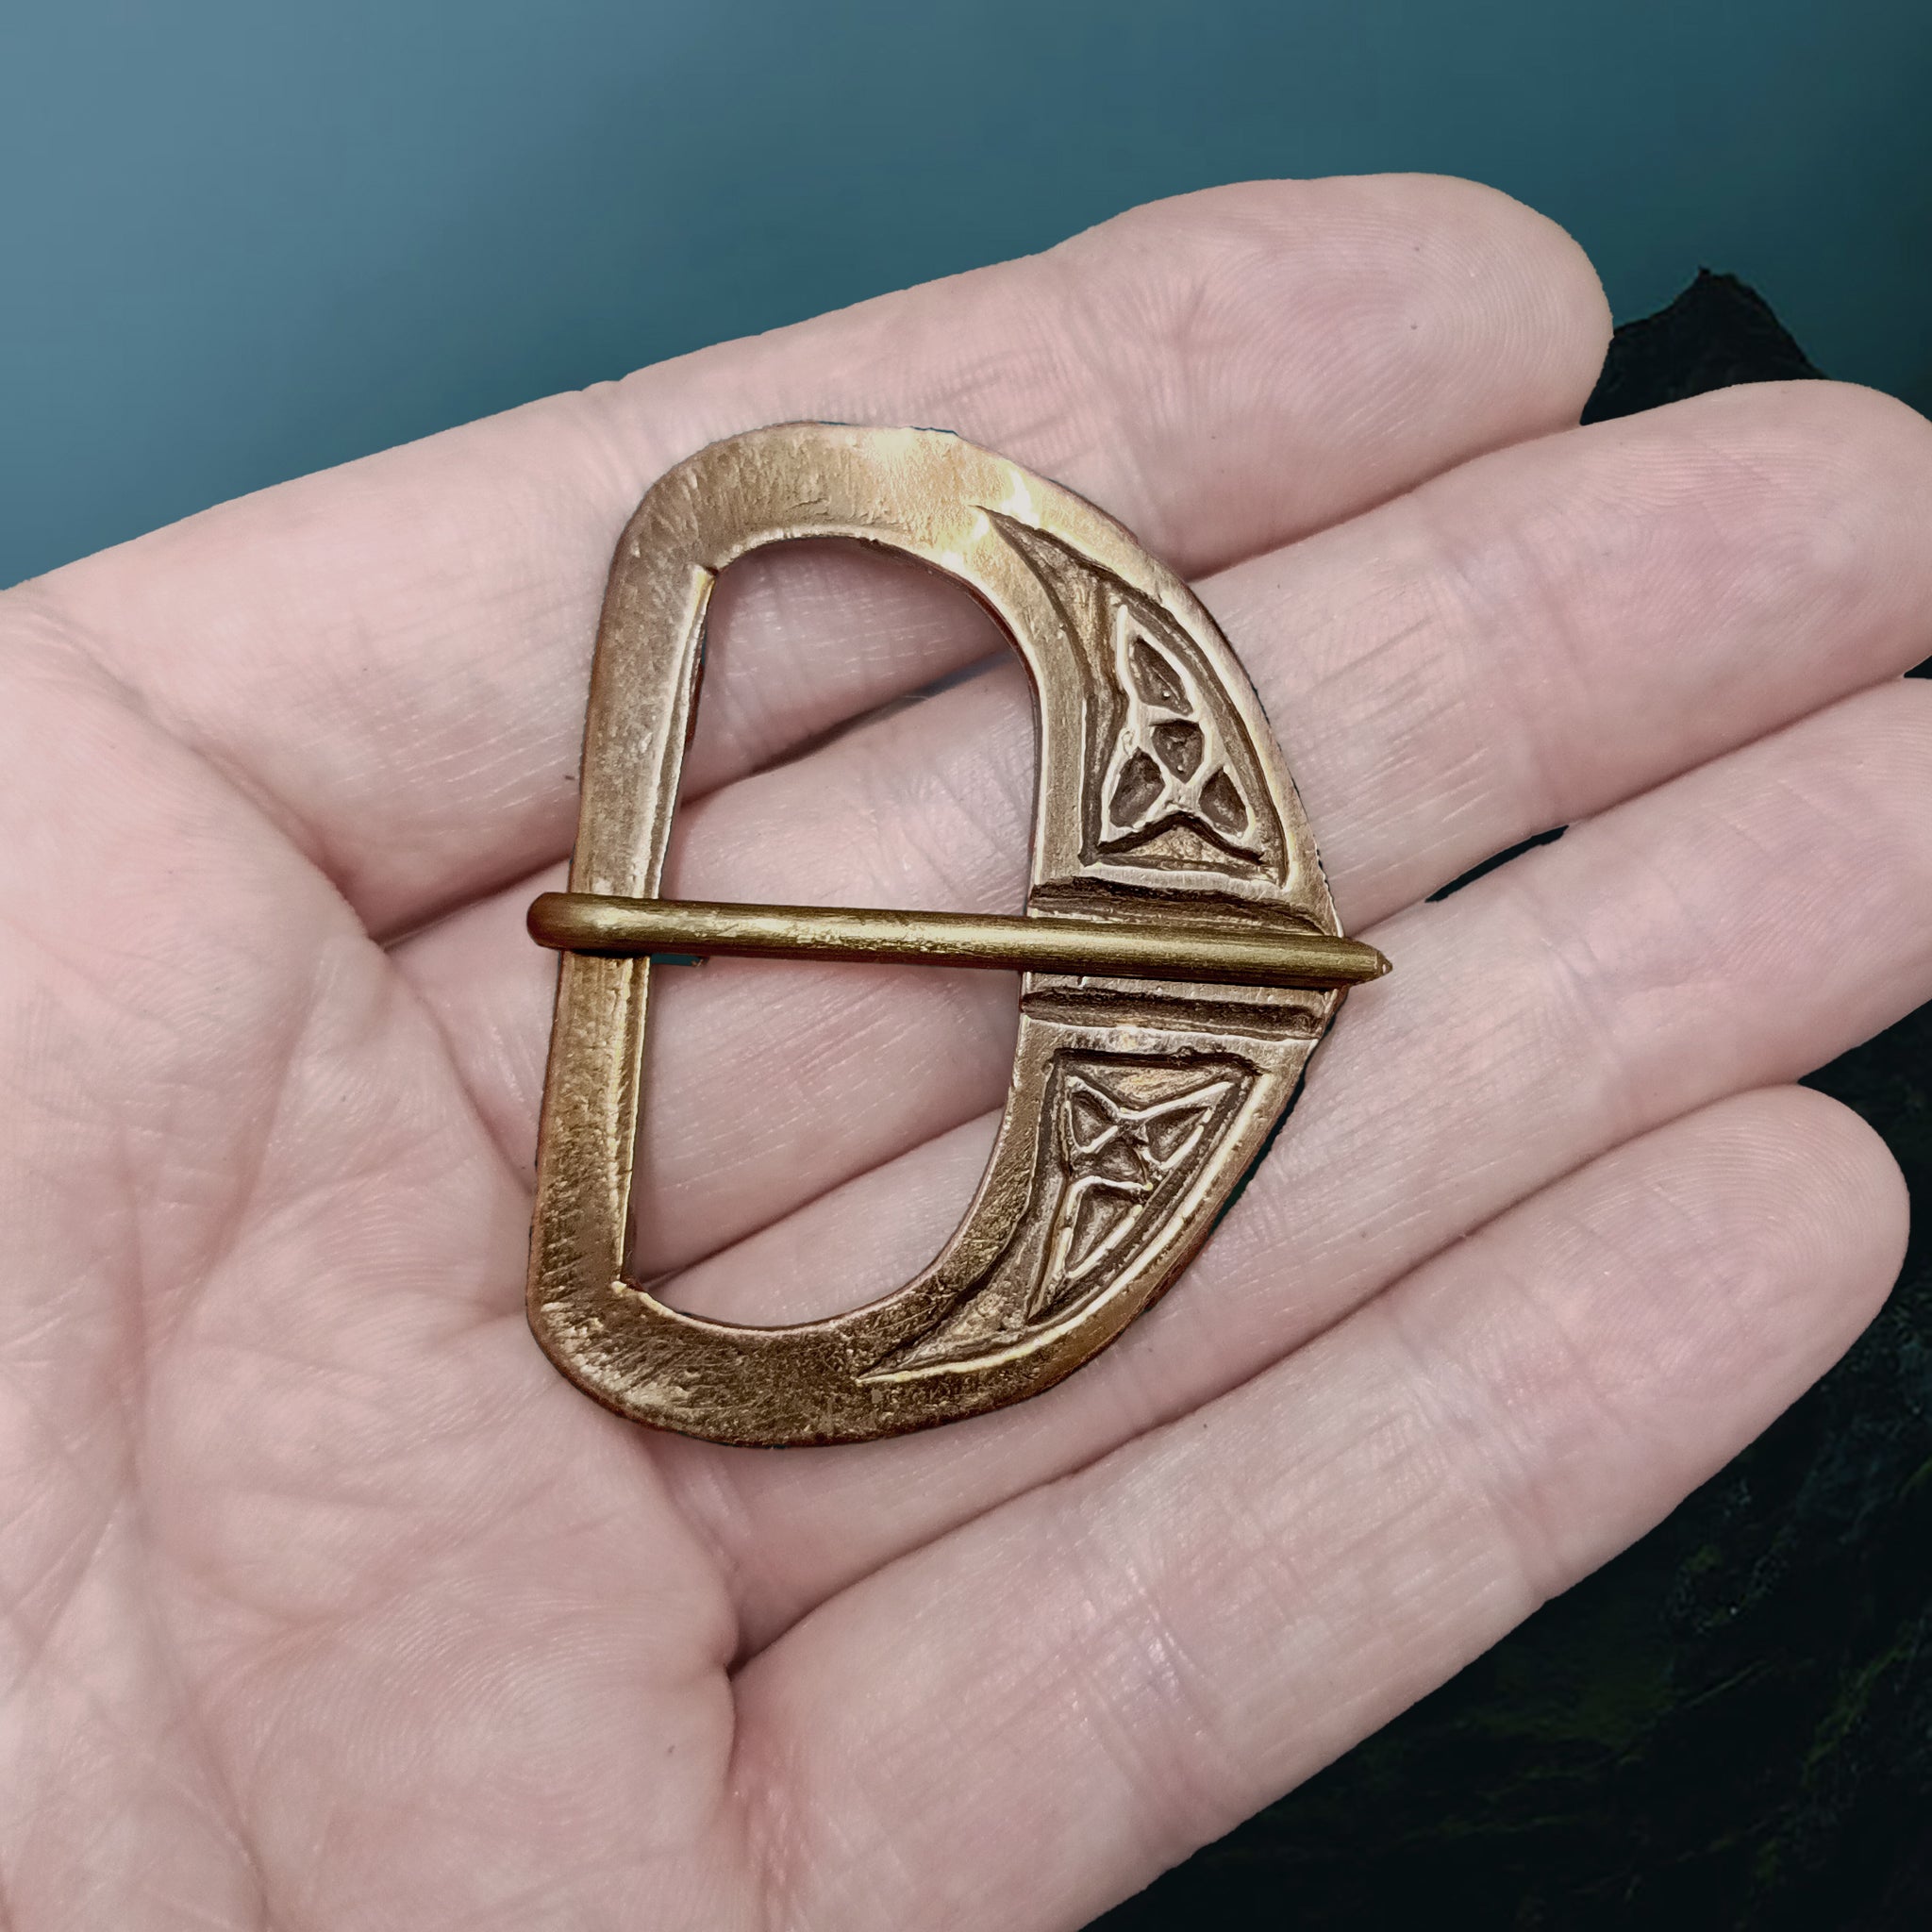 9th - 11th Century Replica Viking Bronze Buckle with Knotwork Design on Hand